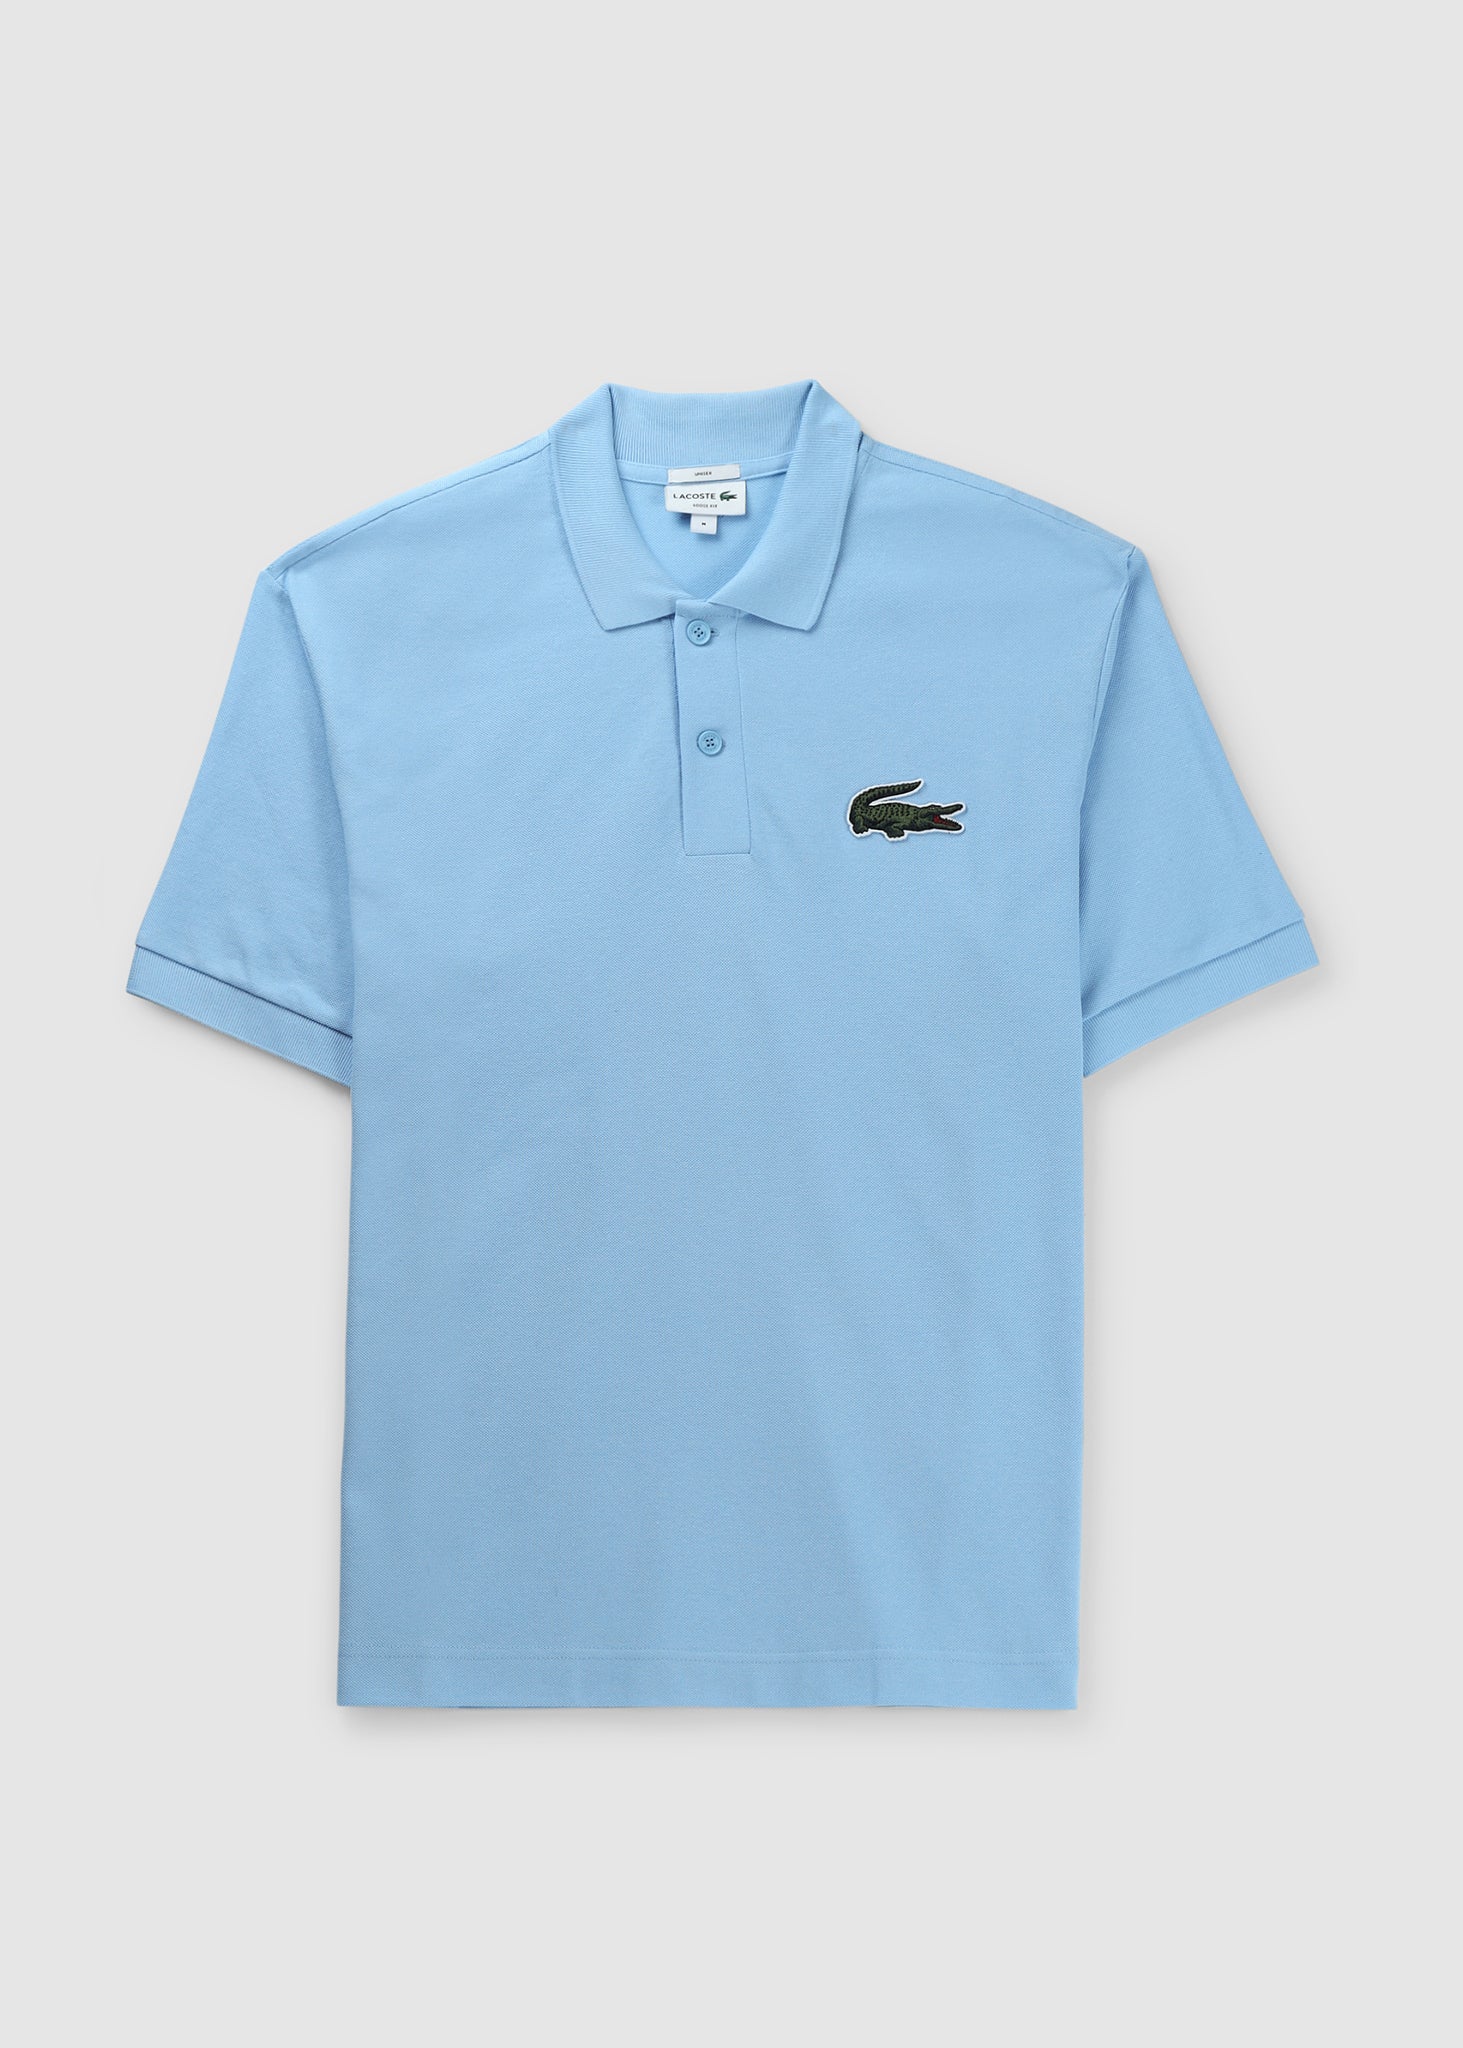 Lacoste Mens Large Croc Polo In Blue - Blue